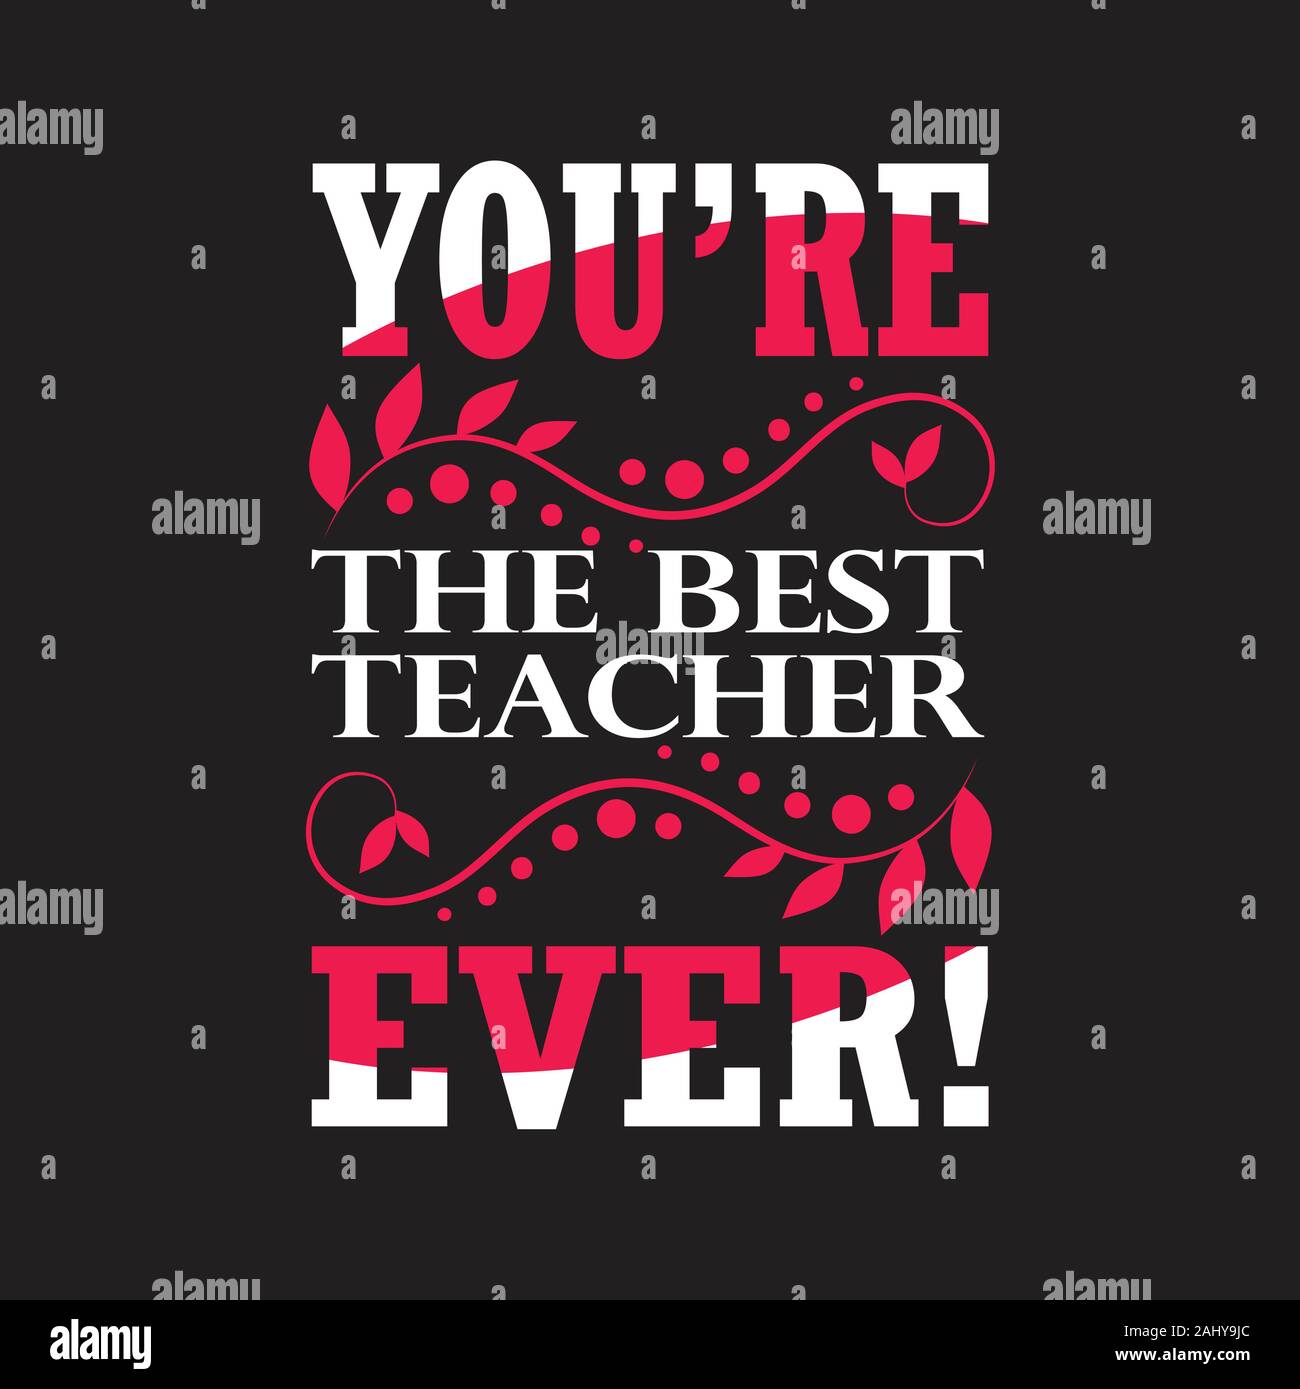 Teachers Quotes And Slogan Good For T Shirt You Re The Best Teacher Ever Stock Vector Image Art Alamy